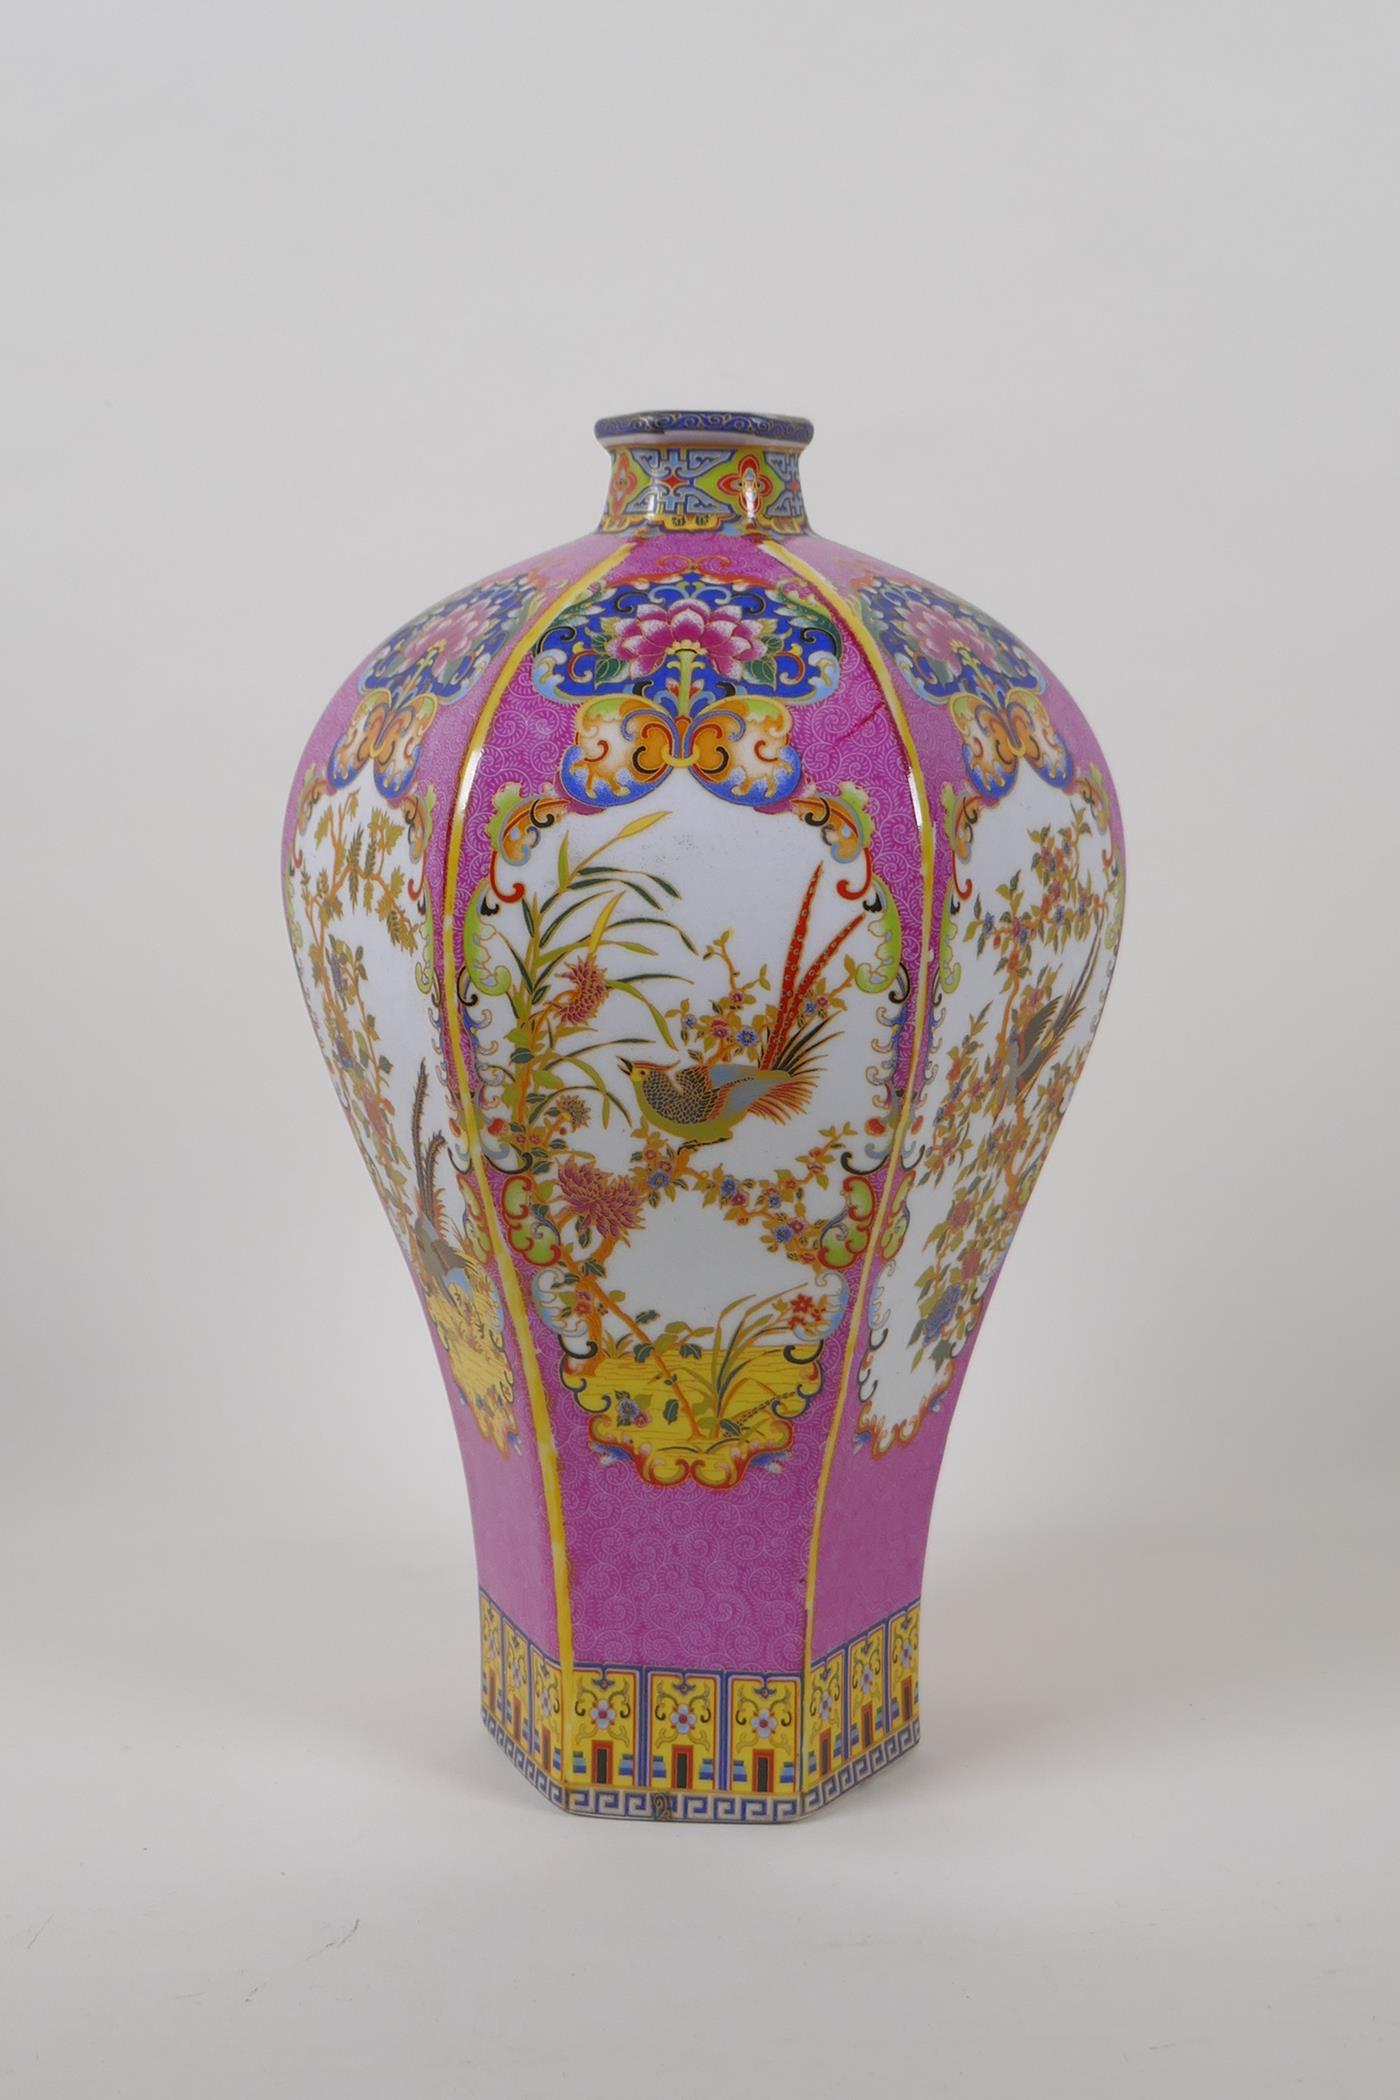 A Chinese hexagonal porcelain vase with polychrome decorative panels depicting birds on a pink